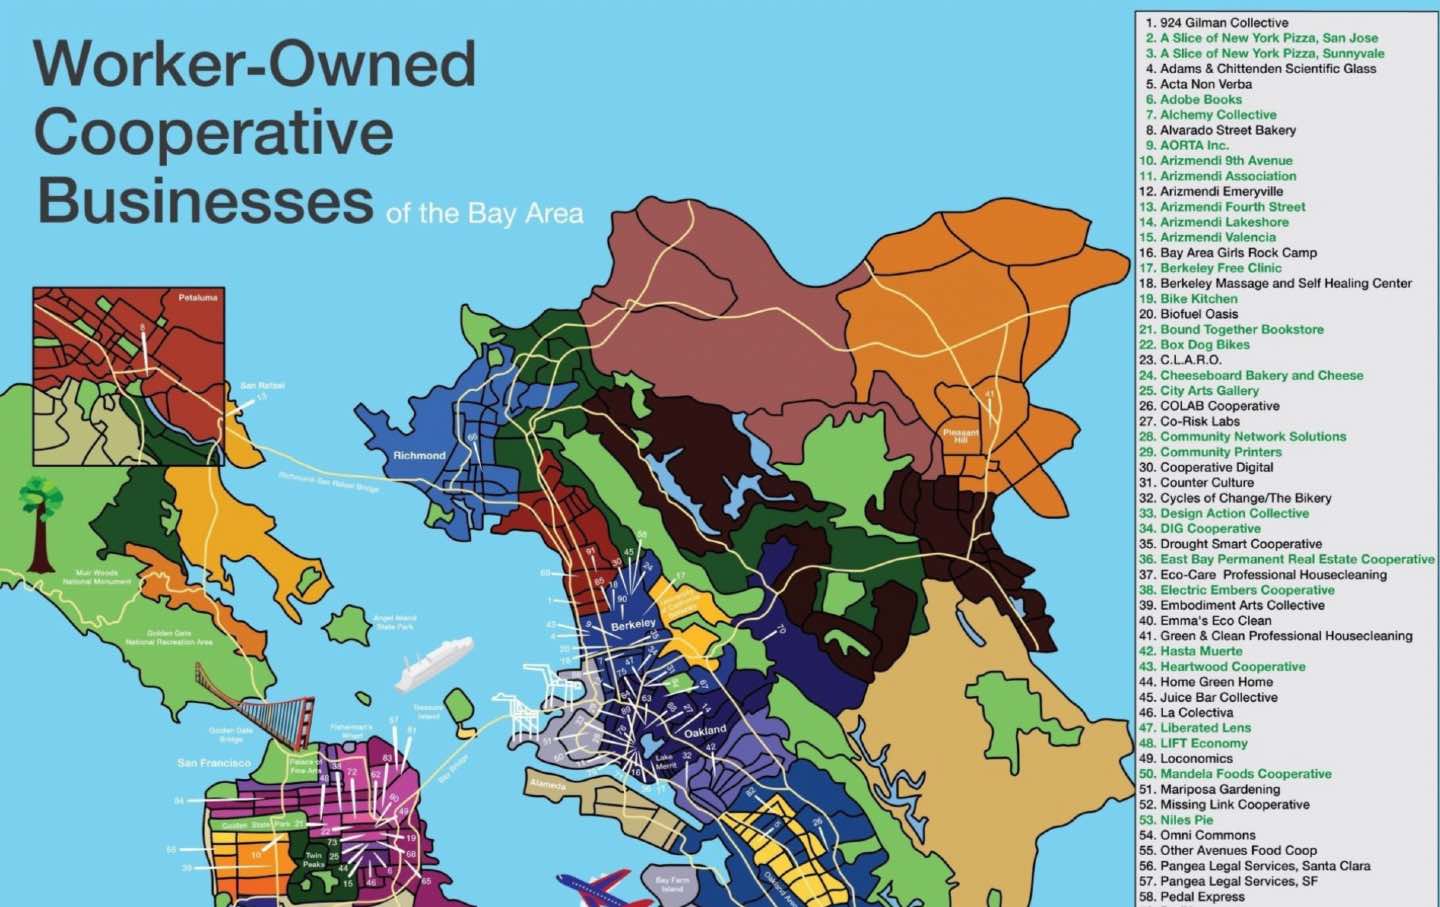 A map of worker-owned cooperative businesses in the bay area from NoBAWC's website